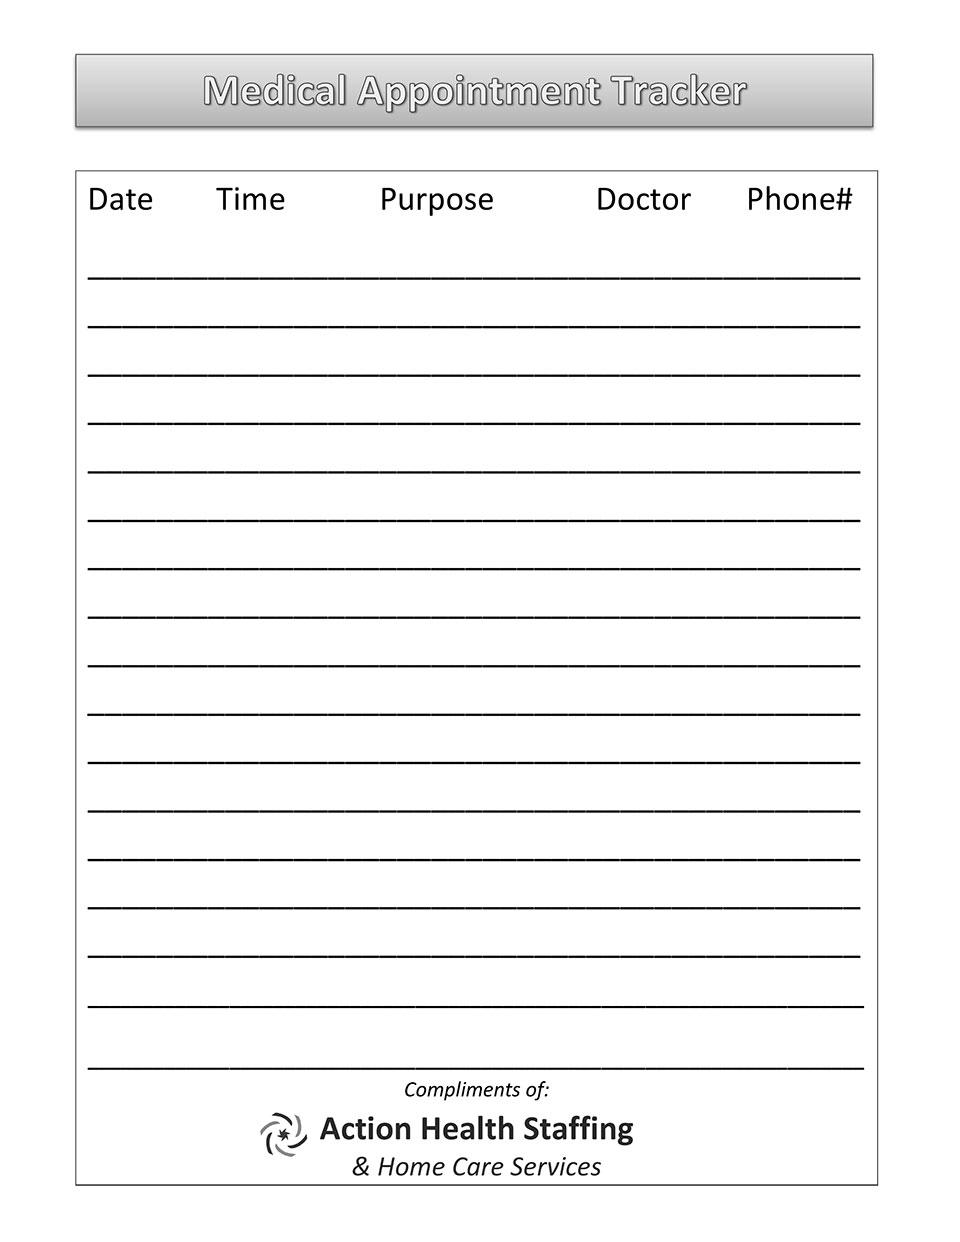 Health Focus Medical Appointment Tracker